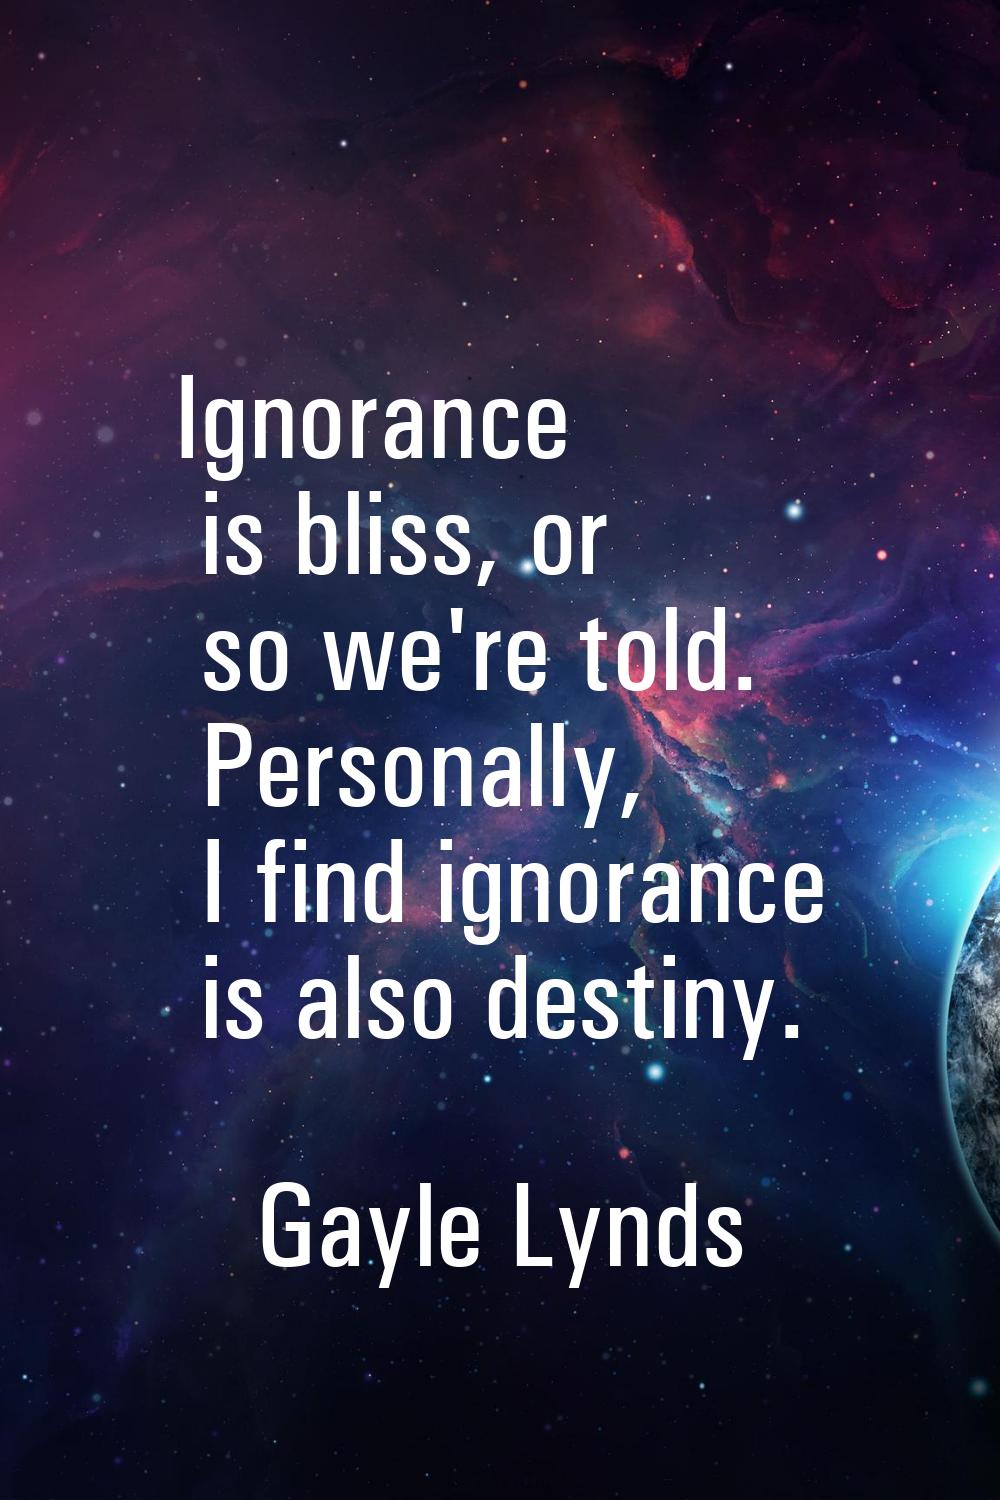 Ignorance is bliss, or so we're told. Personally, I find ignorance is also destiny.